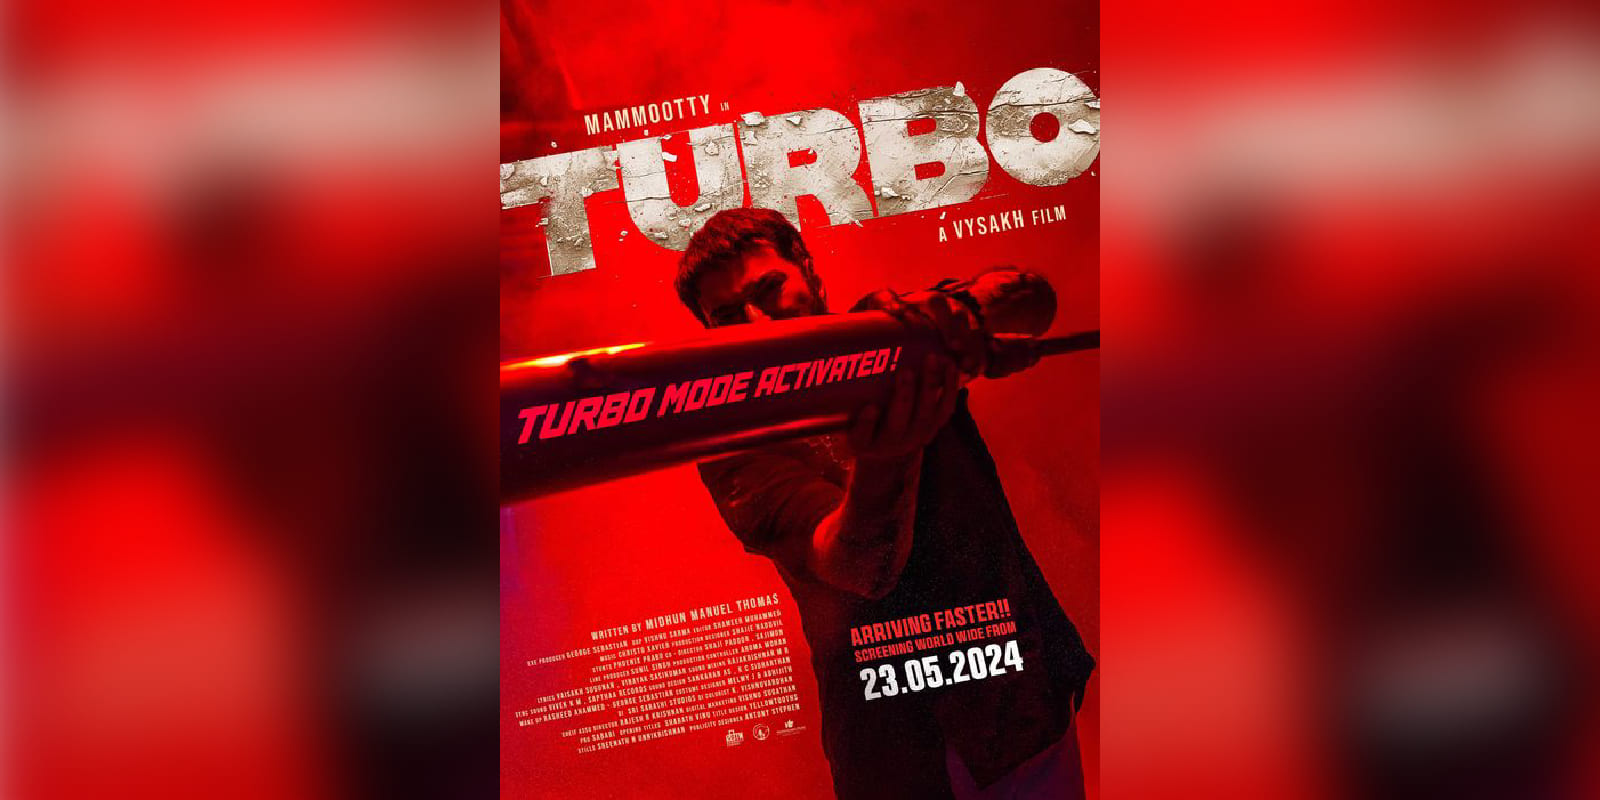 Turbo release date preponed to 23 May